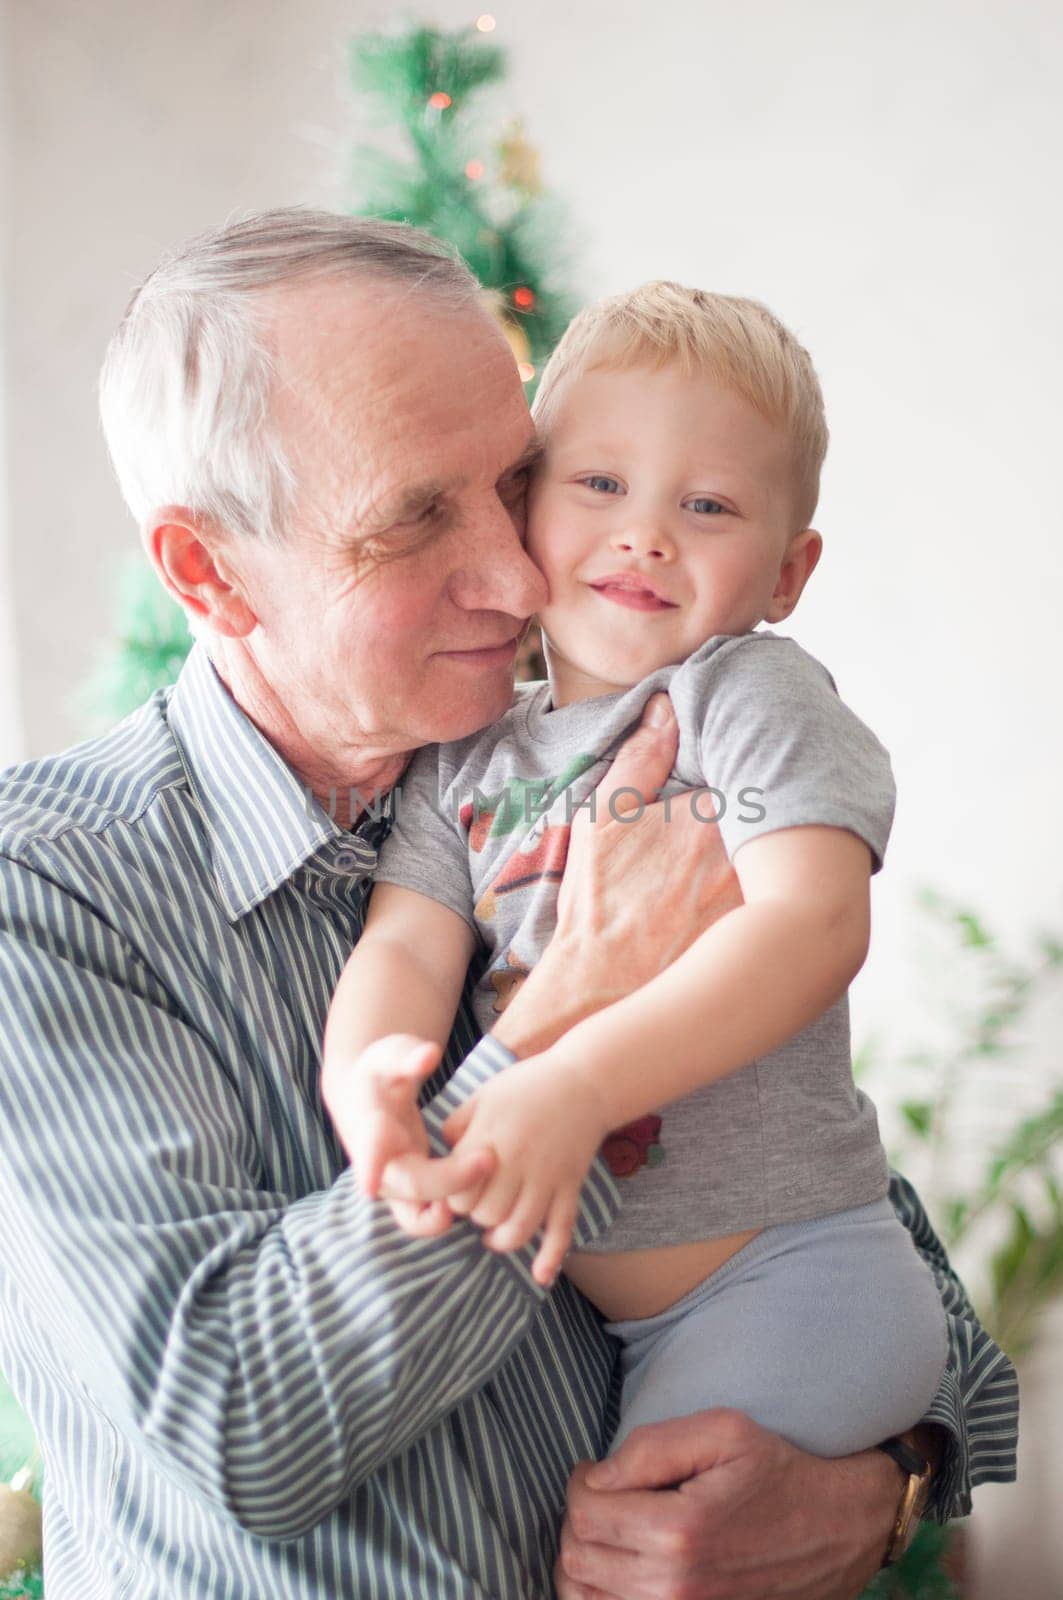 sentimental old man holding a small child in his arms at Christmas in front of a decorated Christmas tree by KaterinaDalemans